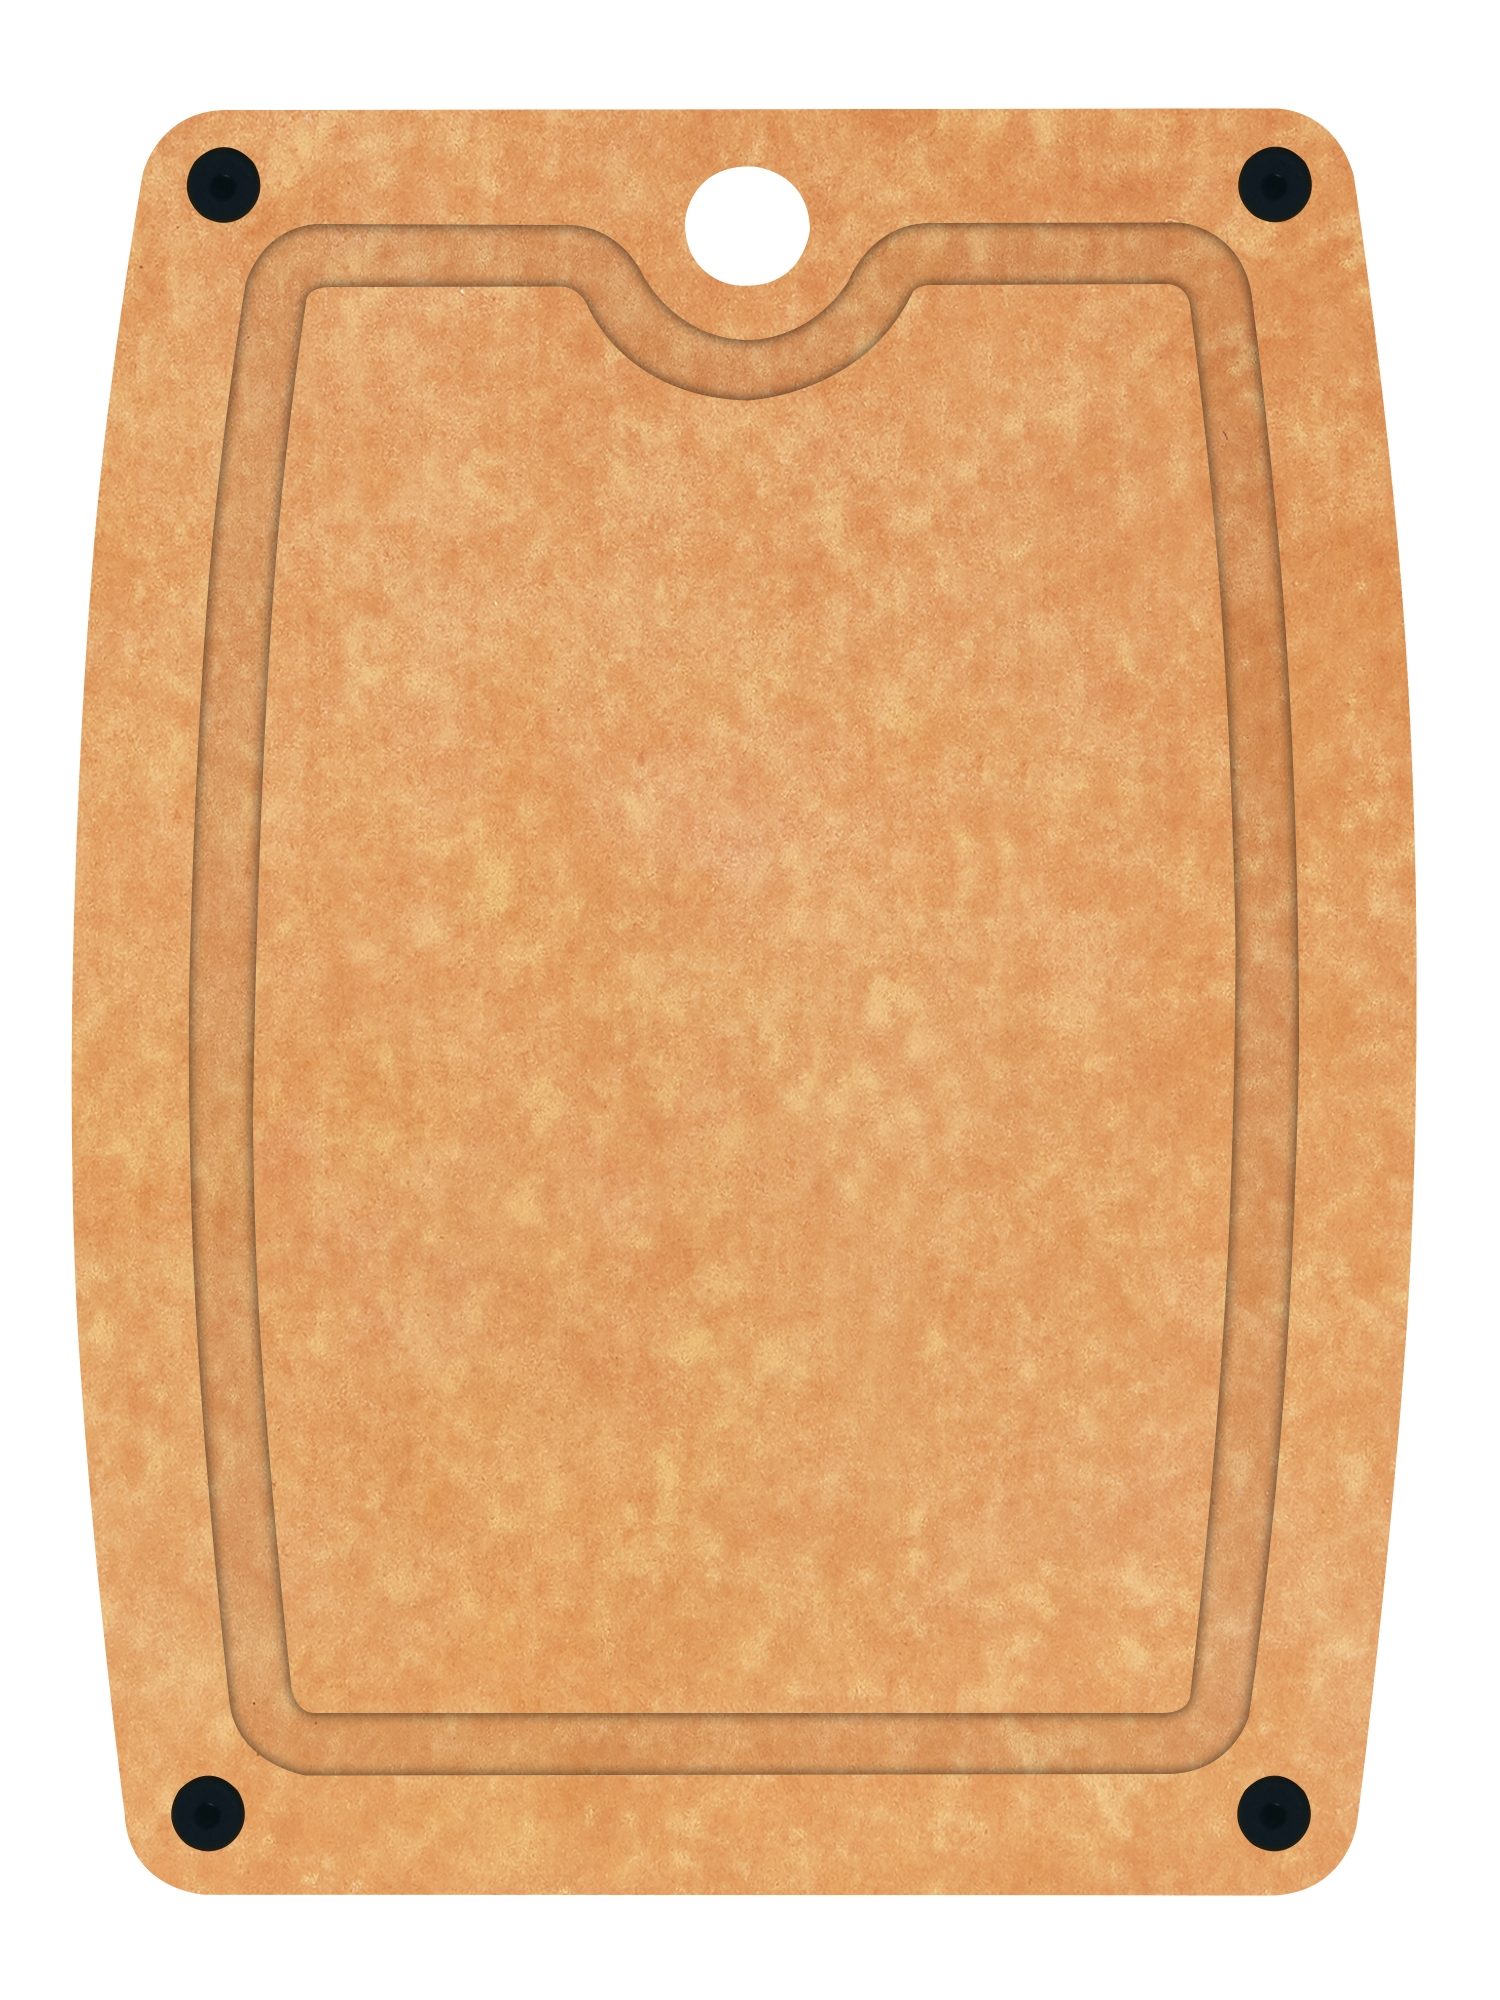 DOUBLE SIDED CHOPPING BOARD WITH FEET NATURAL 370 X 275 X 6MM